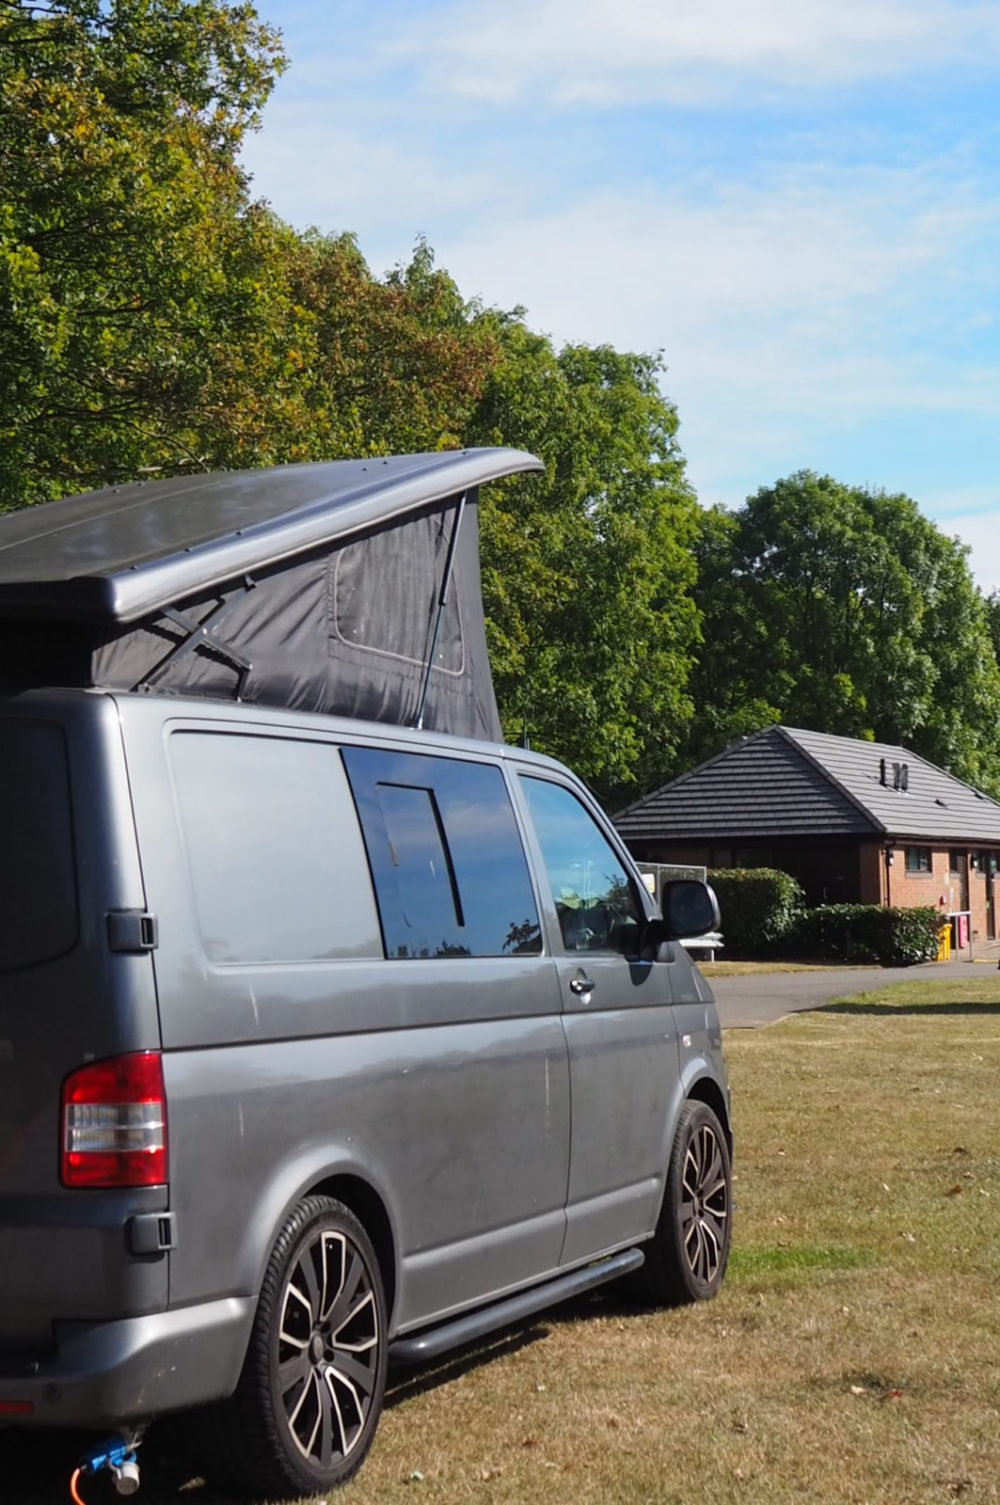 Campervan conversion - how to enjoy a family camper van holiday